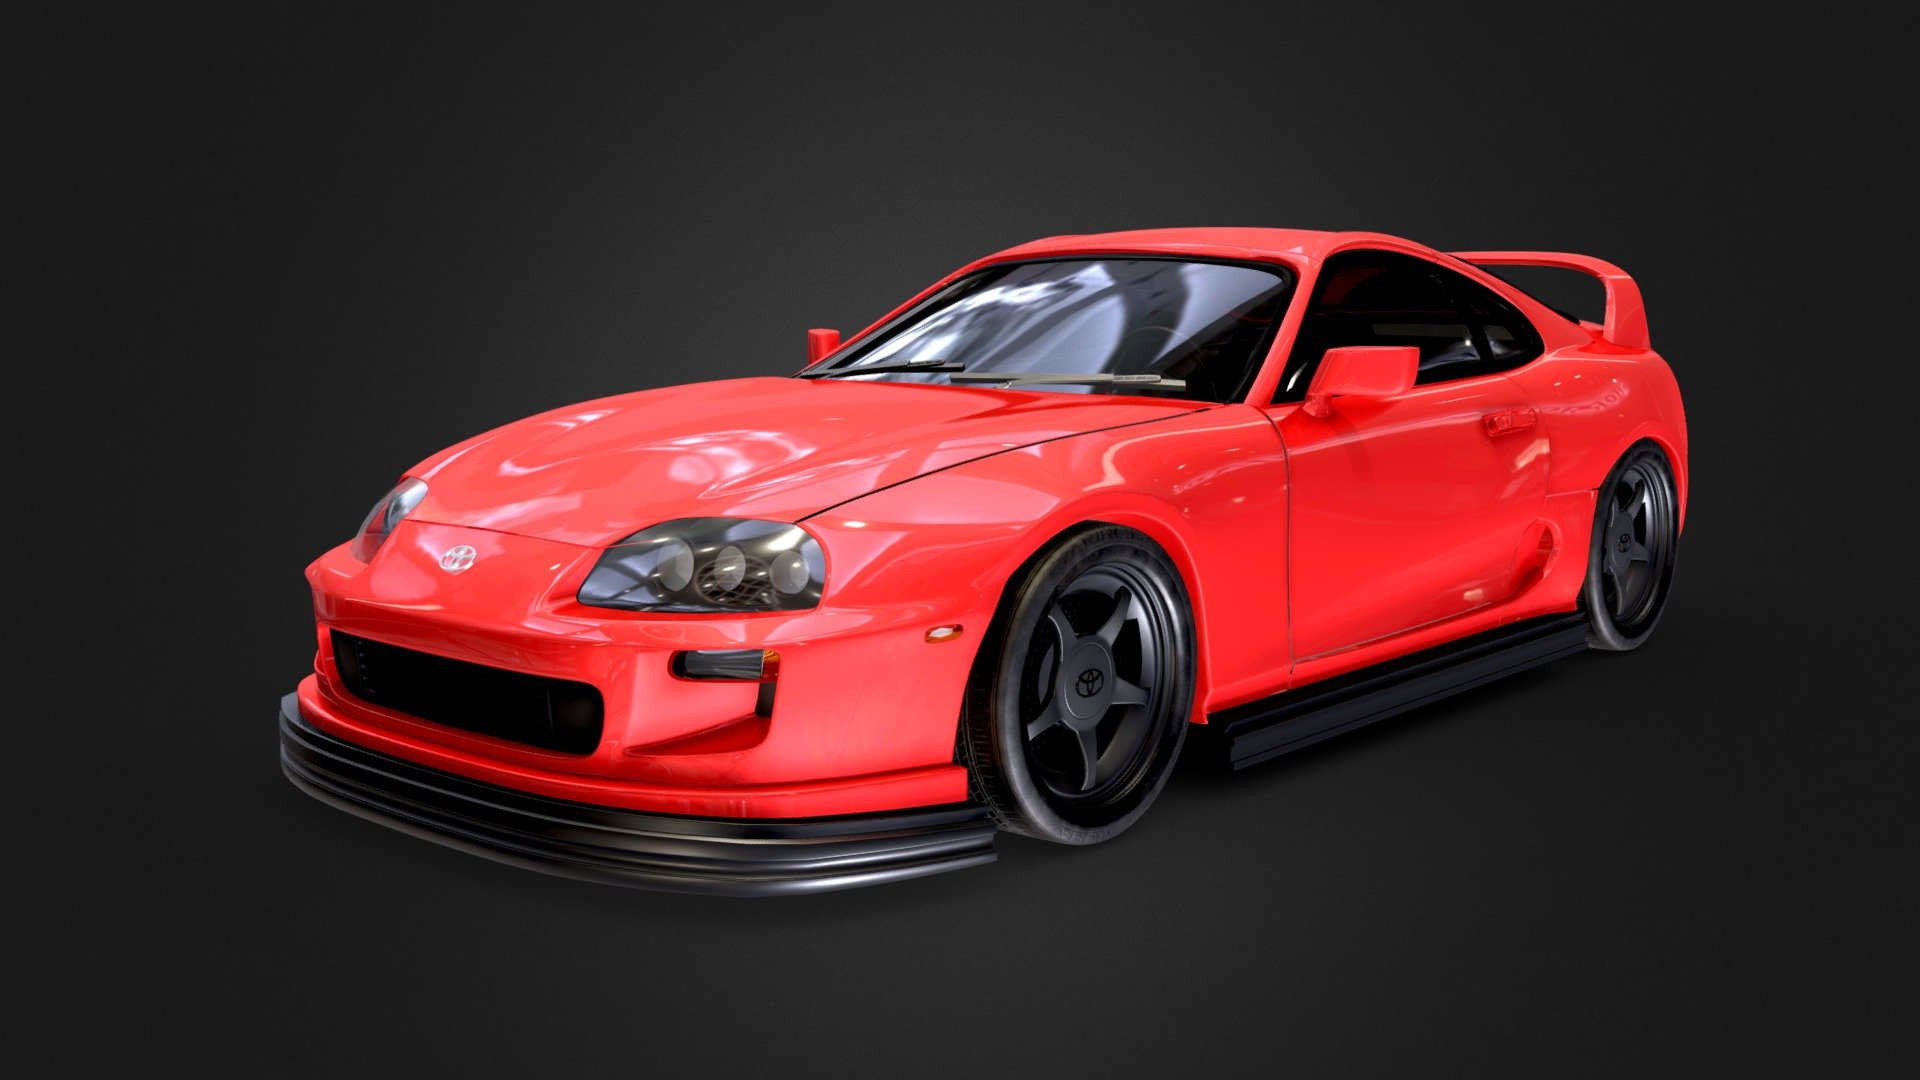 Toyota supra mk4 3d modele with procedural car paint and 508.5k polygon ready for Cycles and Eevee render engines,,,, don't forget to rate it :) - Toyota_supra_mk4 - 3D model by Reza988y 3d model